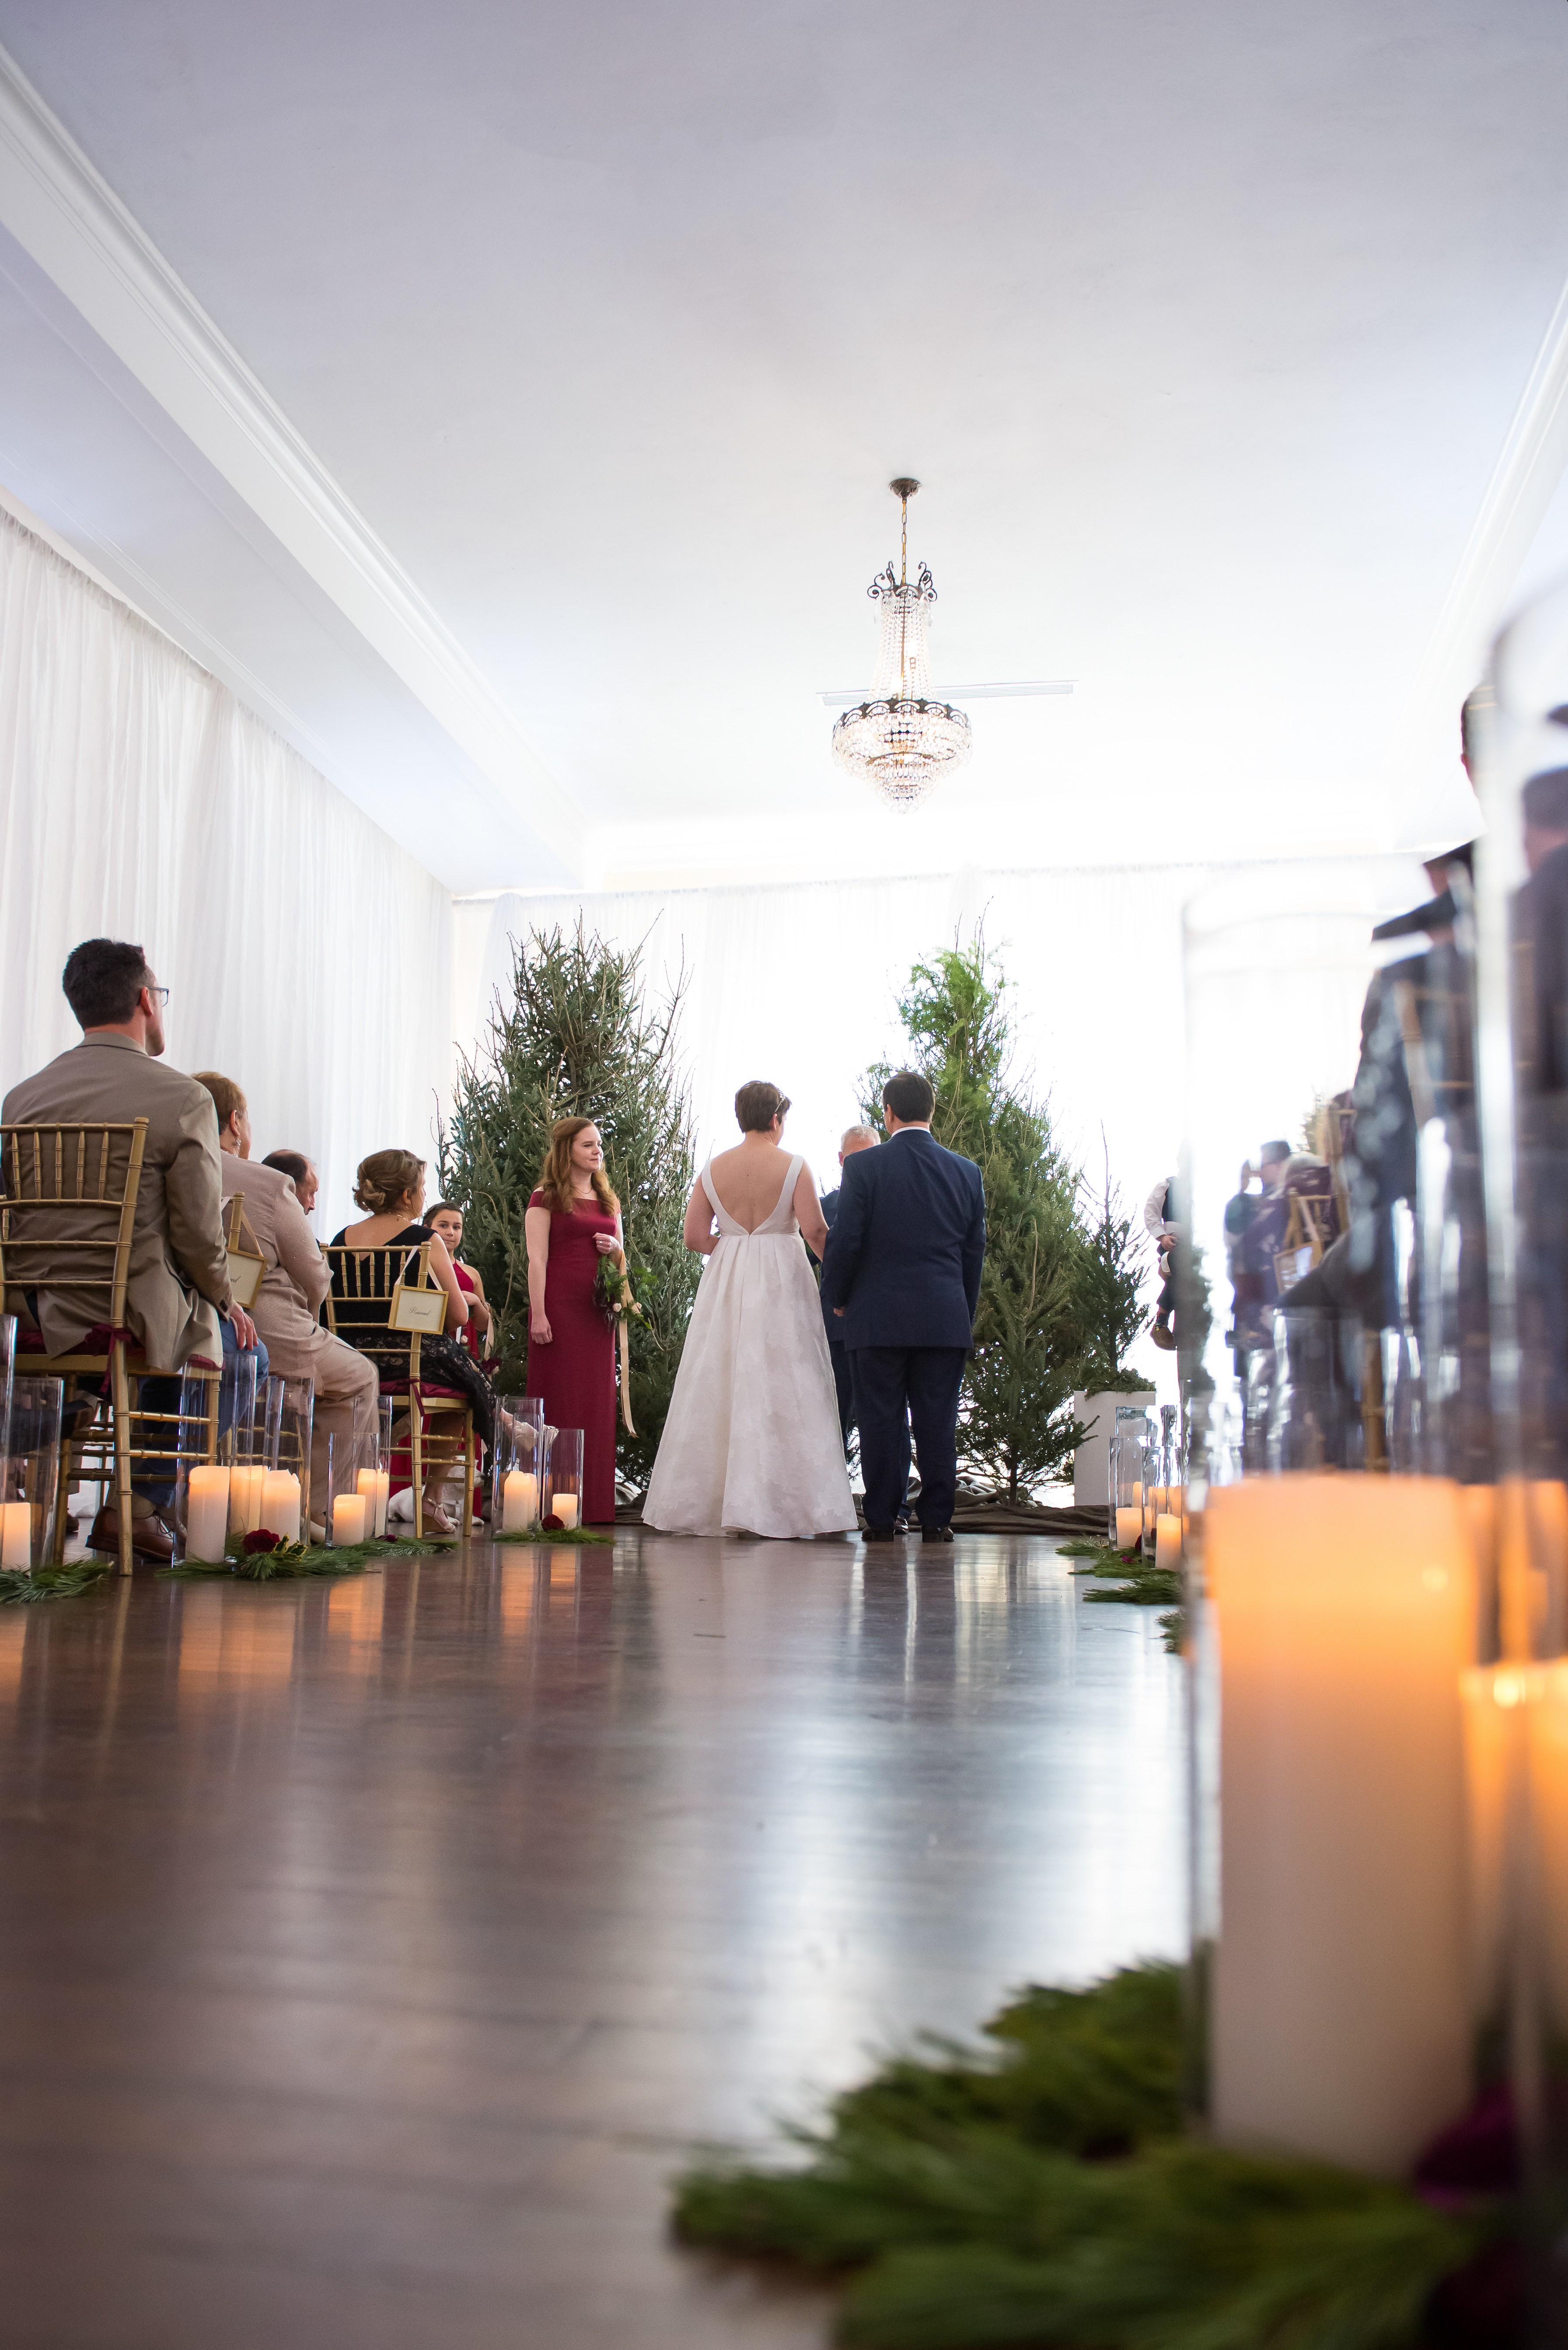 Christmas Wedding Ceremony Decor, Bride and Groom Exchanging Wedding Vows, Christmas Trees at Altar | Tampa Bay Wedding Photographer Carrie Wildes Photography | South Tampa Wedding Venue The Orlo House